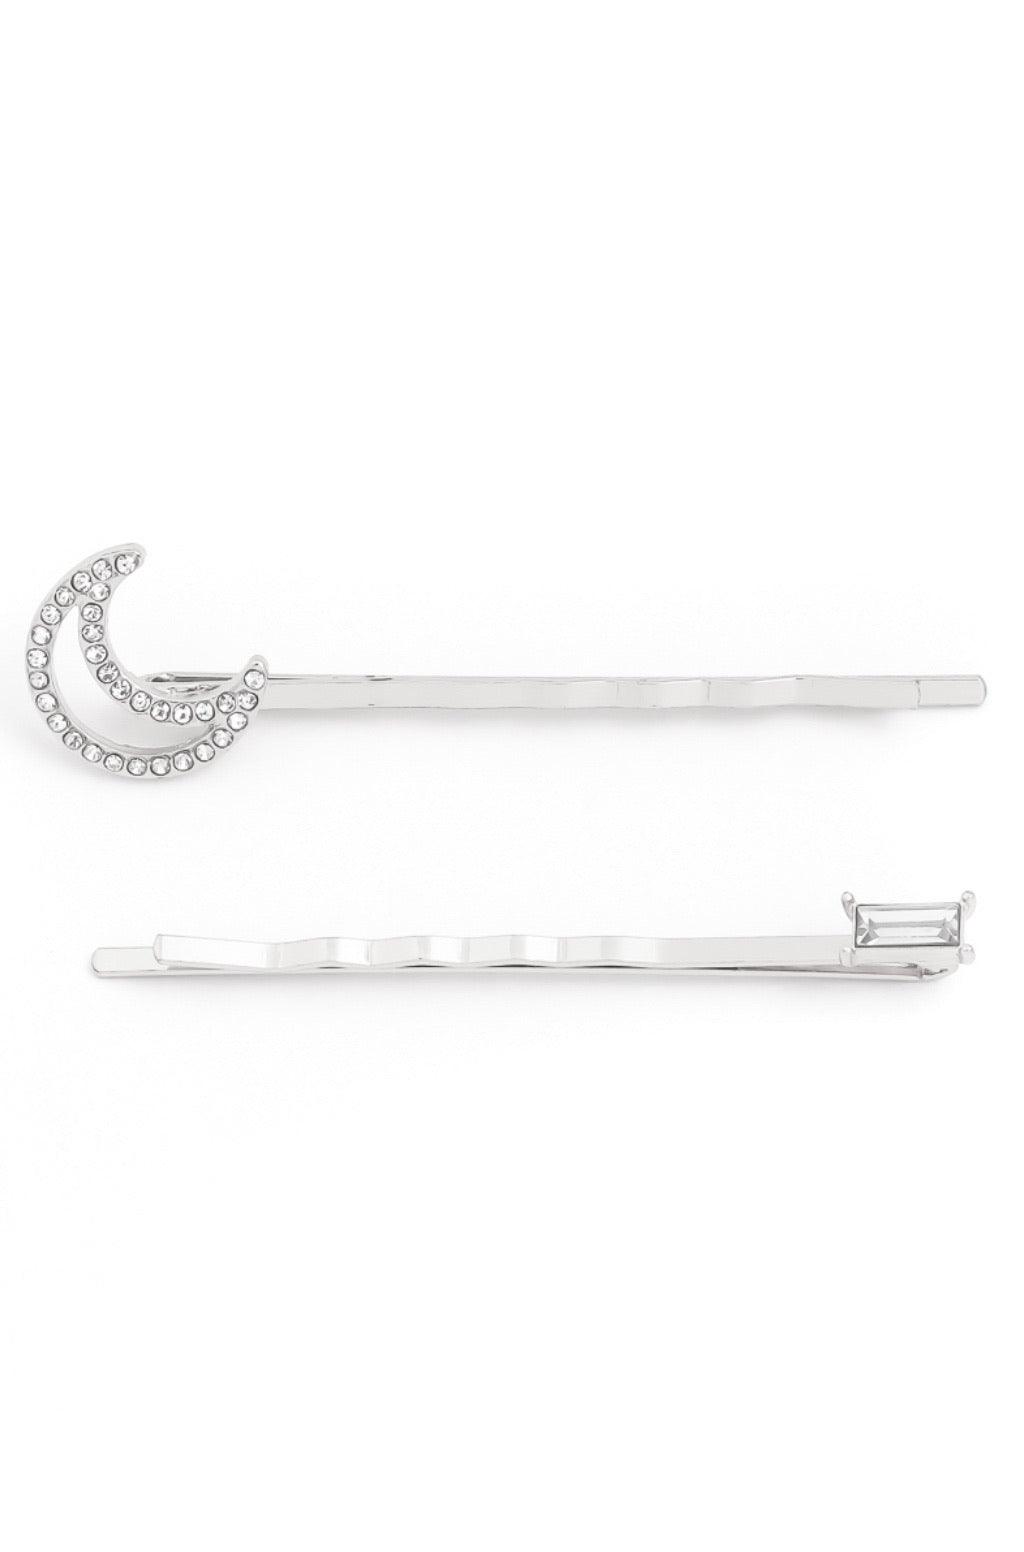 Crescent Moon Hair Pin Set - Silver - Pineapple Lain Boutique